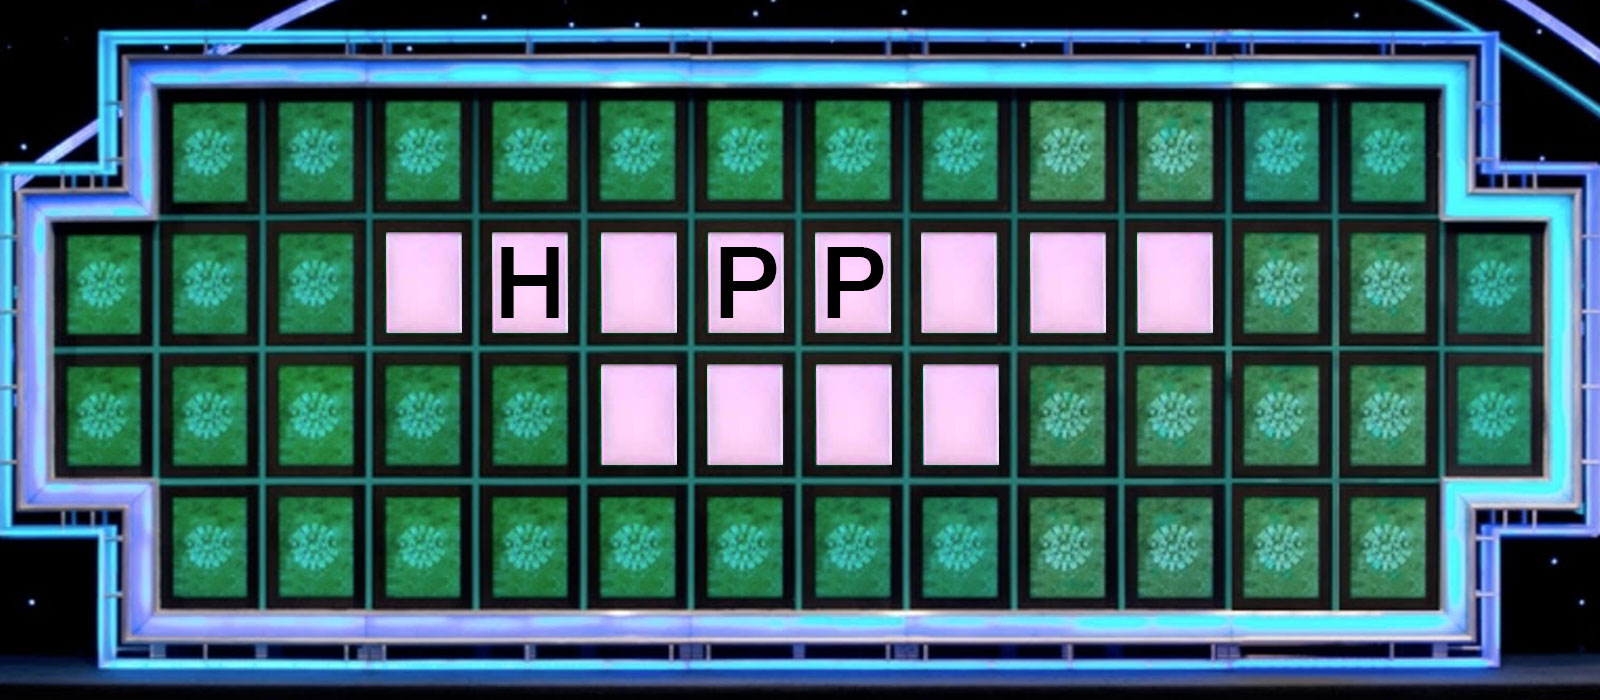 Can You Solve These Wheel of Fortune Puzzles? Quiz 318